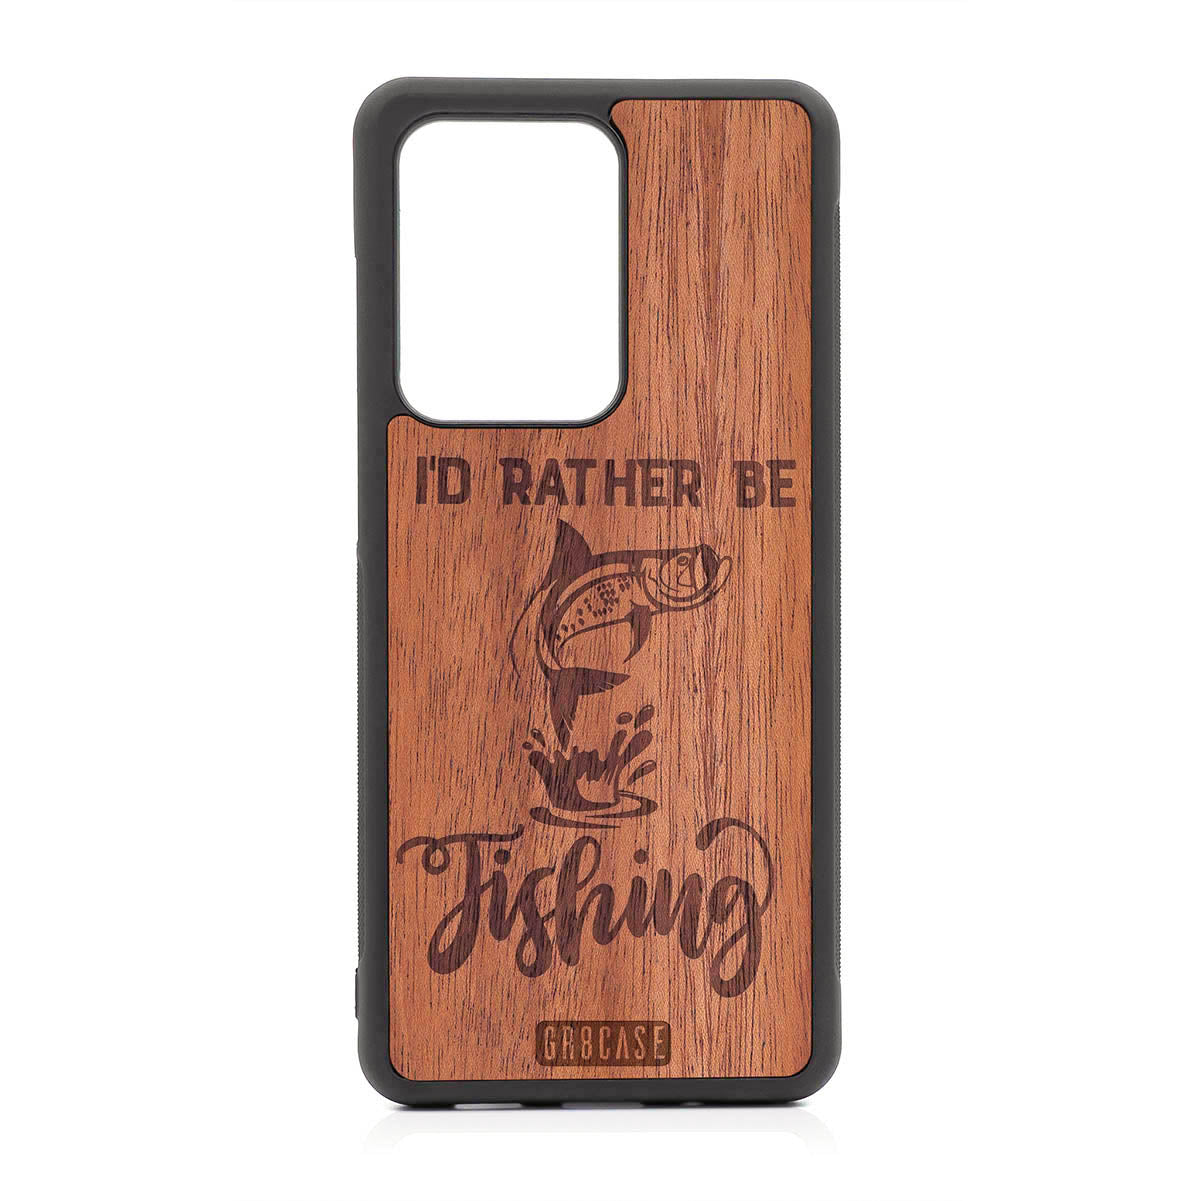 I'D Rather Be Fishing Design Wood Case For Samsung Galaxy S20 Ultra